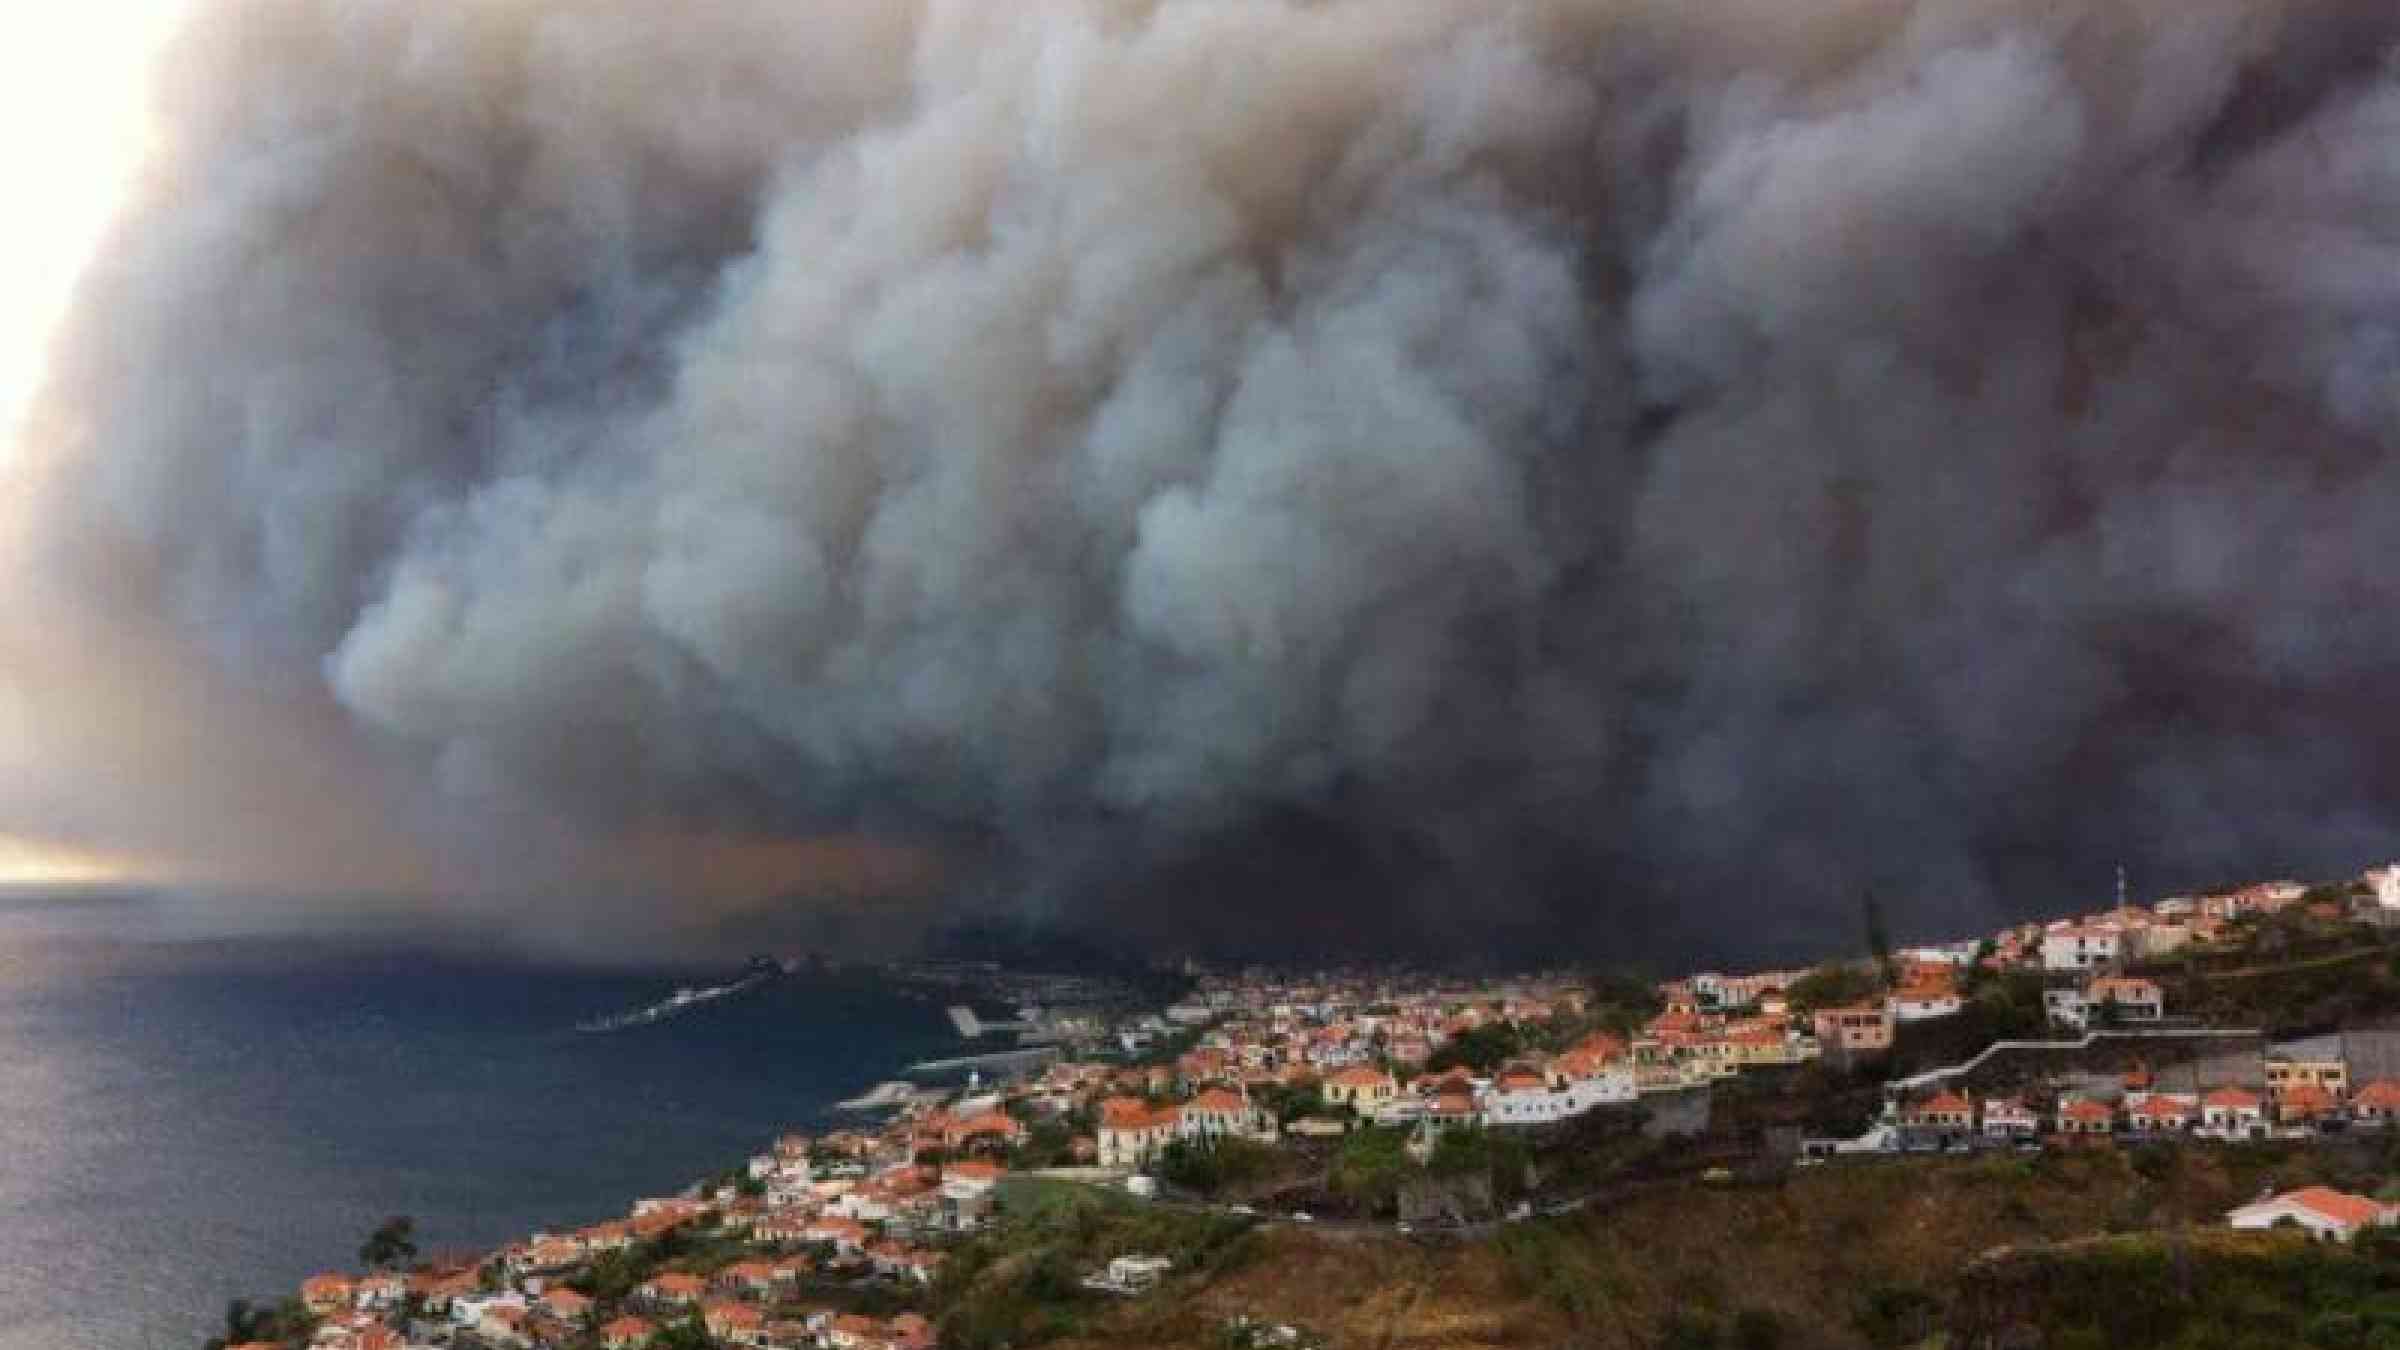 Portugal is battling wildfires both on the mainland and on the Atlantic island of Madeira pictured here.